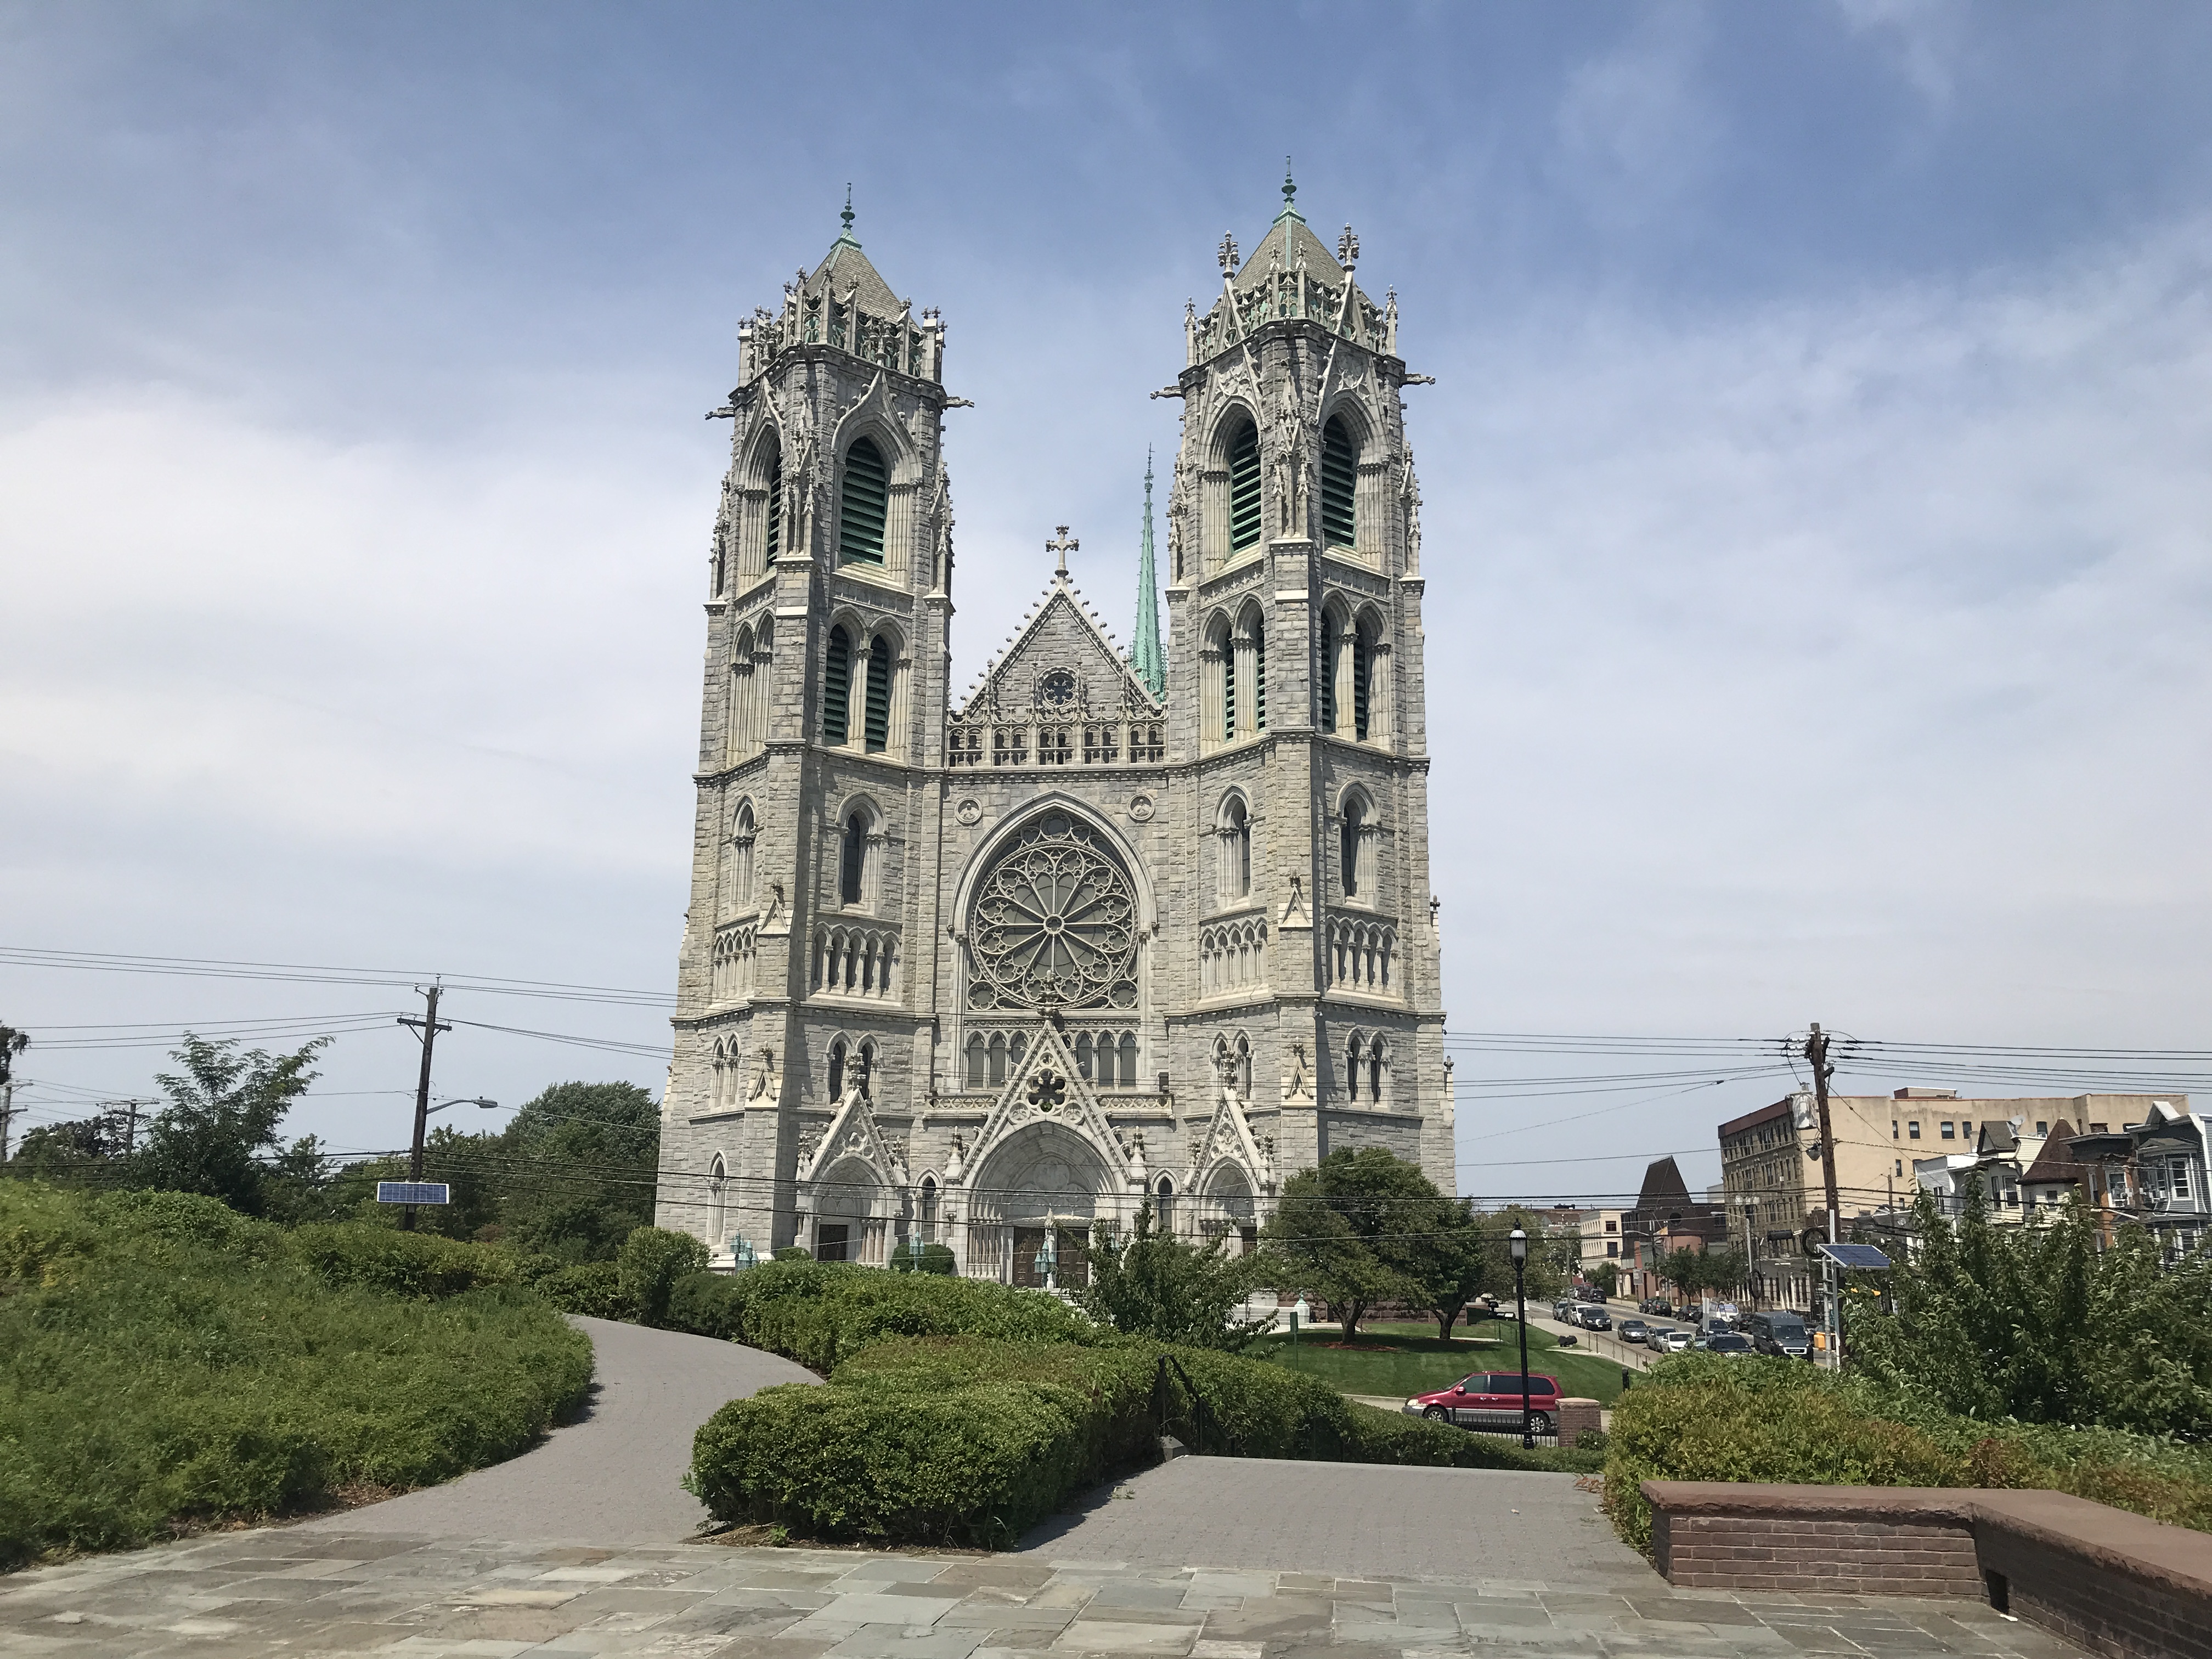 The grey, tall towers of the Cathedral Basilica of the Sacred Heart. Many long windows adorn the church. The ground is concrete with some green bushes. Newark, New Jersey, United States of America.